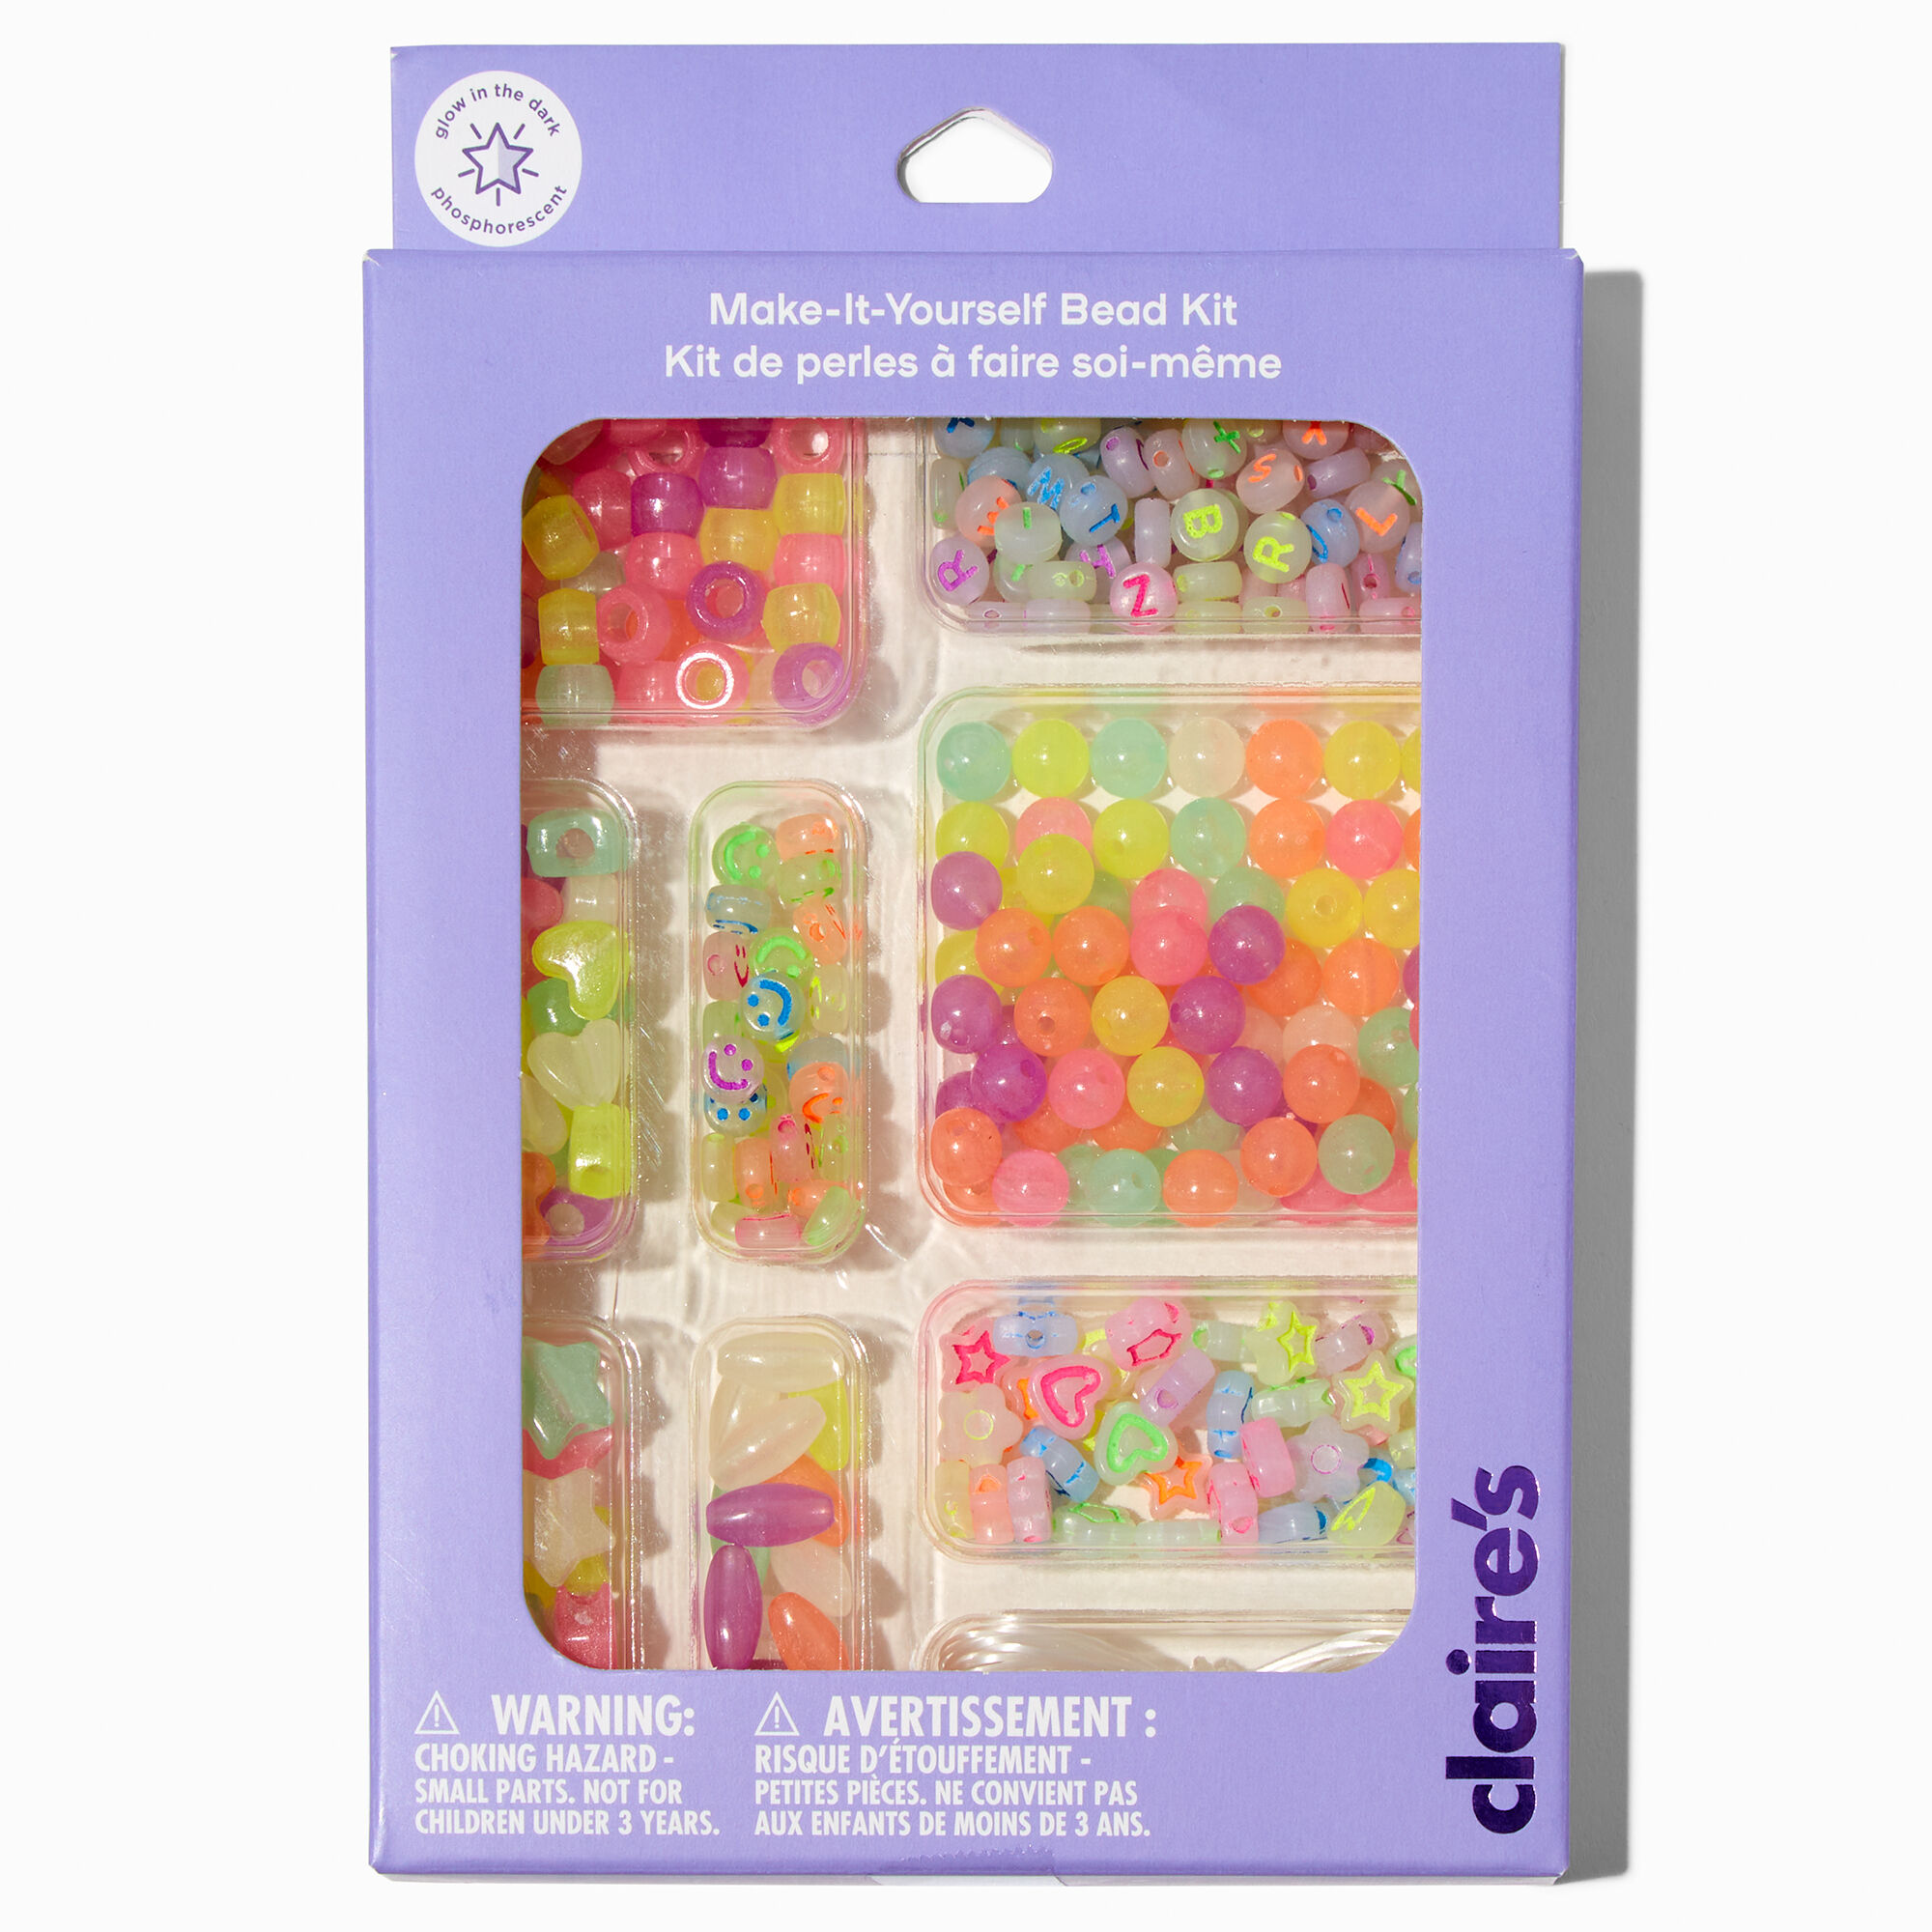 View Claires Glow In The Dark MakeItYourself Bead Kit information